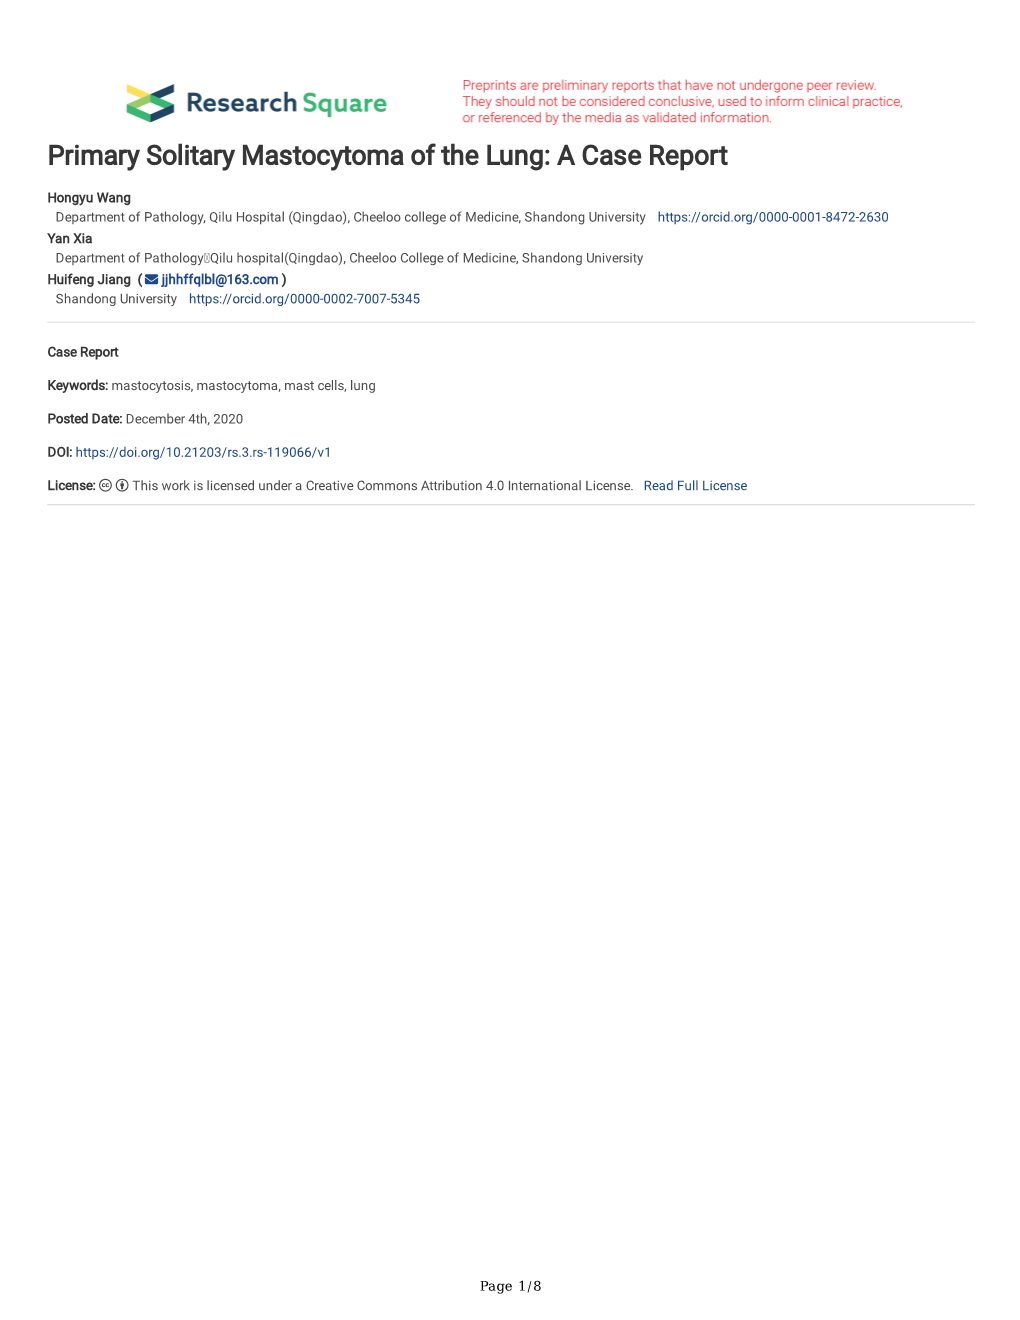 Primary Solitary Mastocytoma of the Lung: a Case Report